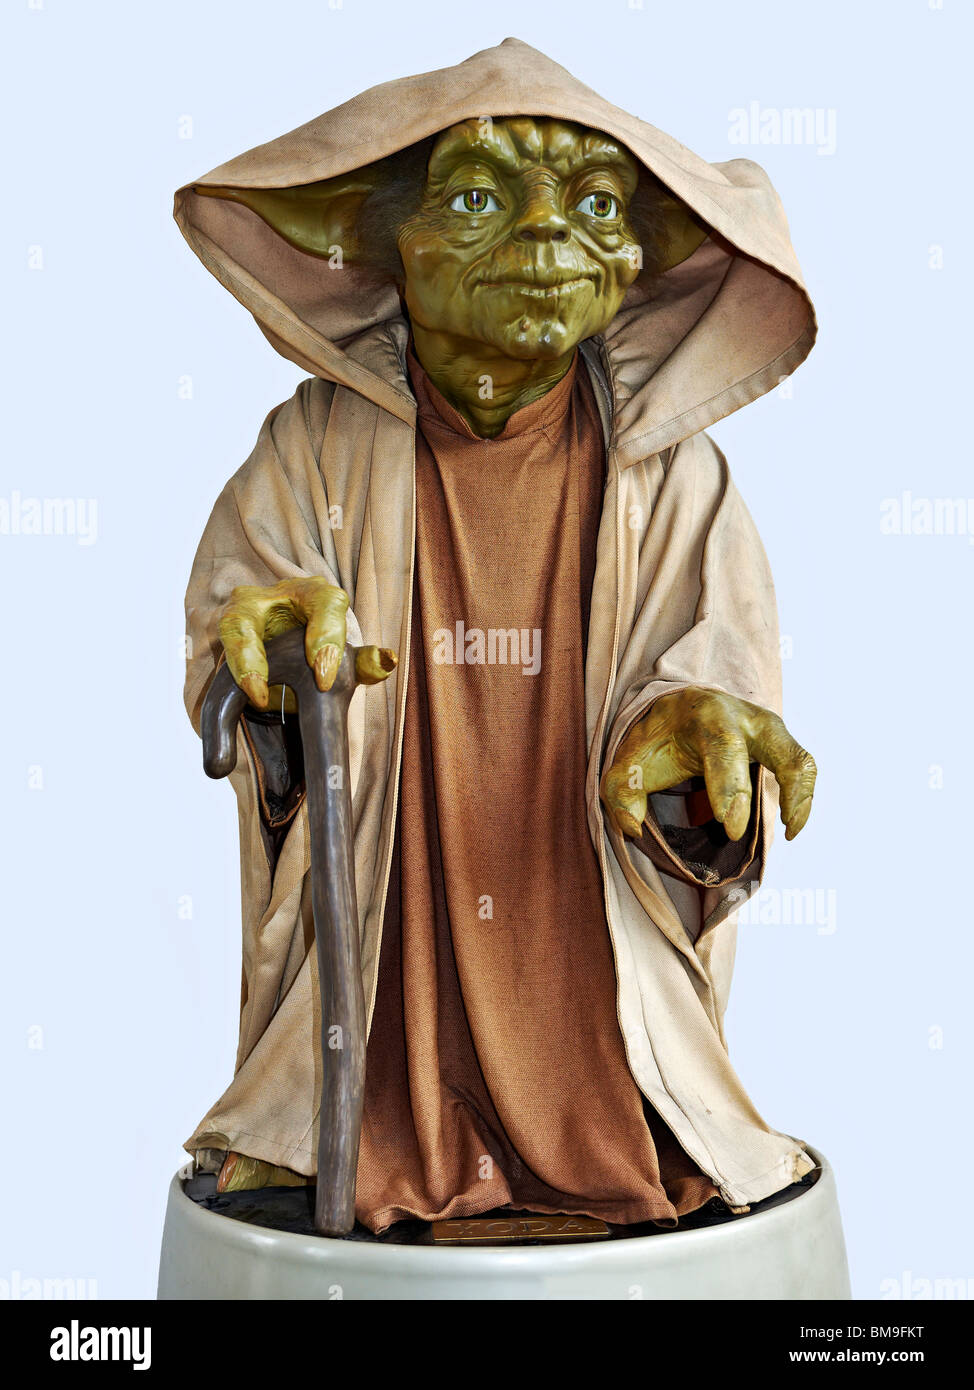 Master Yoda alien figure cut out against a plain background Stock Photo